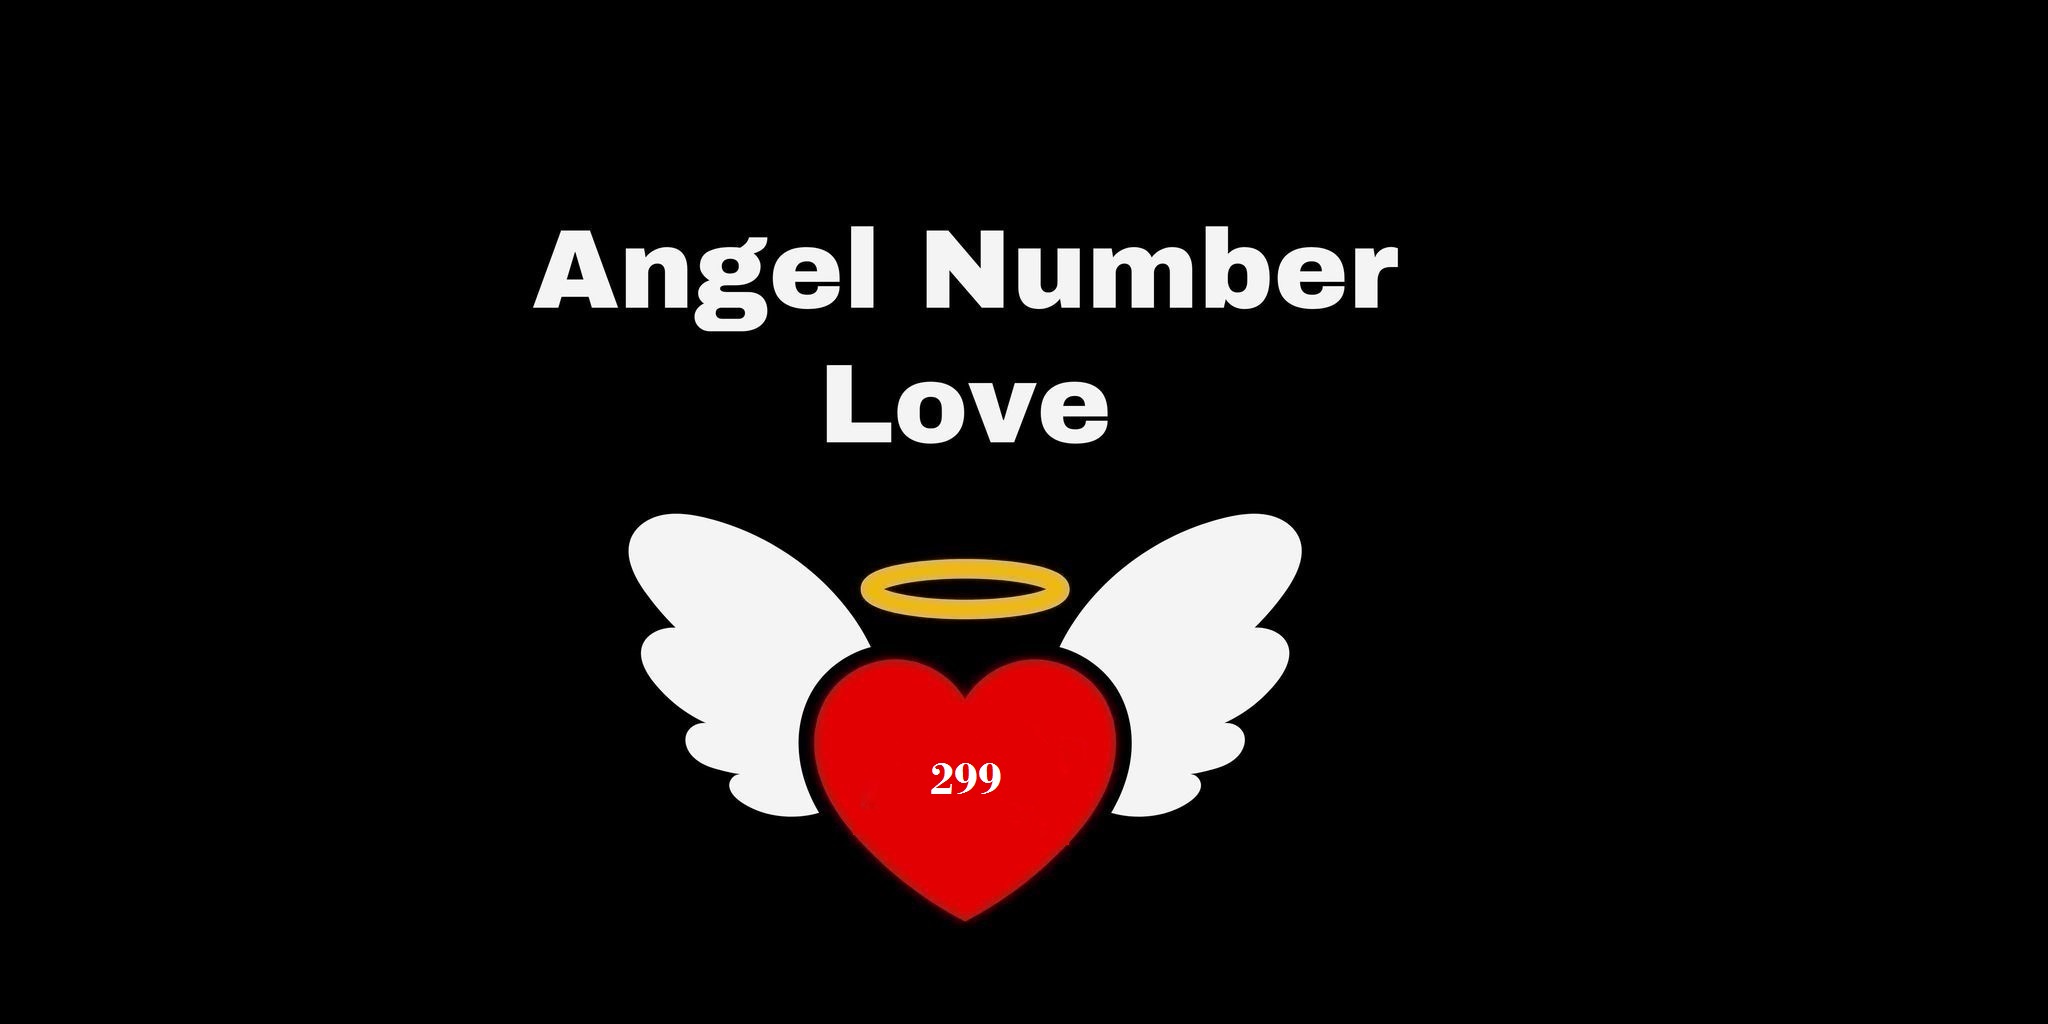 299 Angel Number Meaning In Love